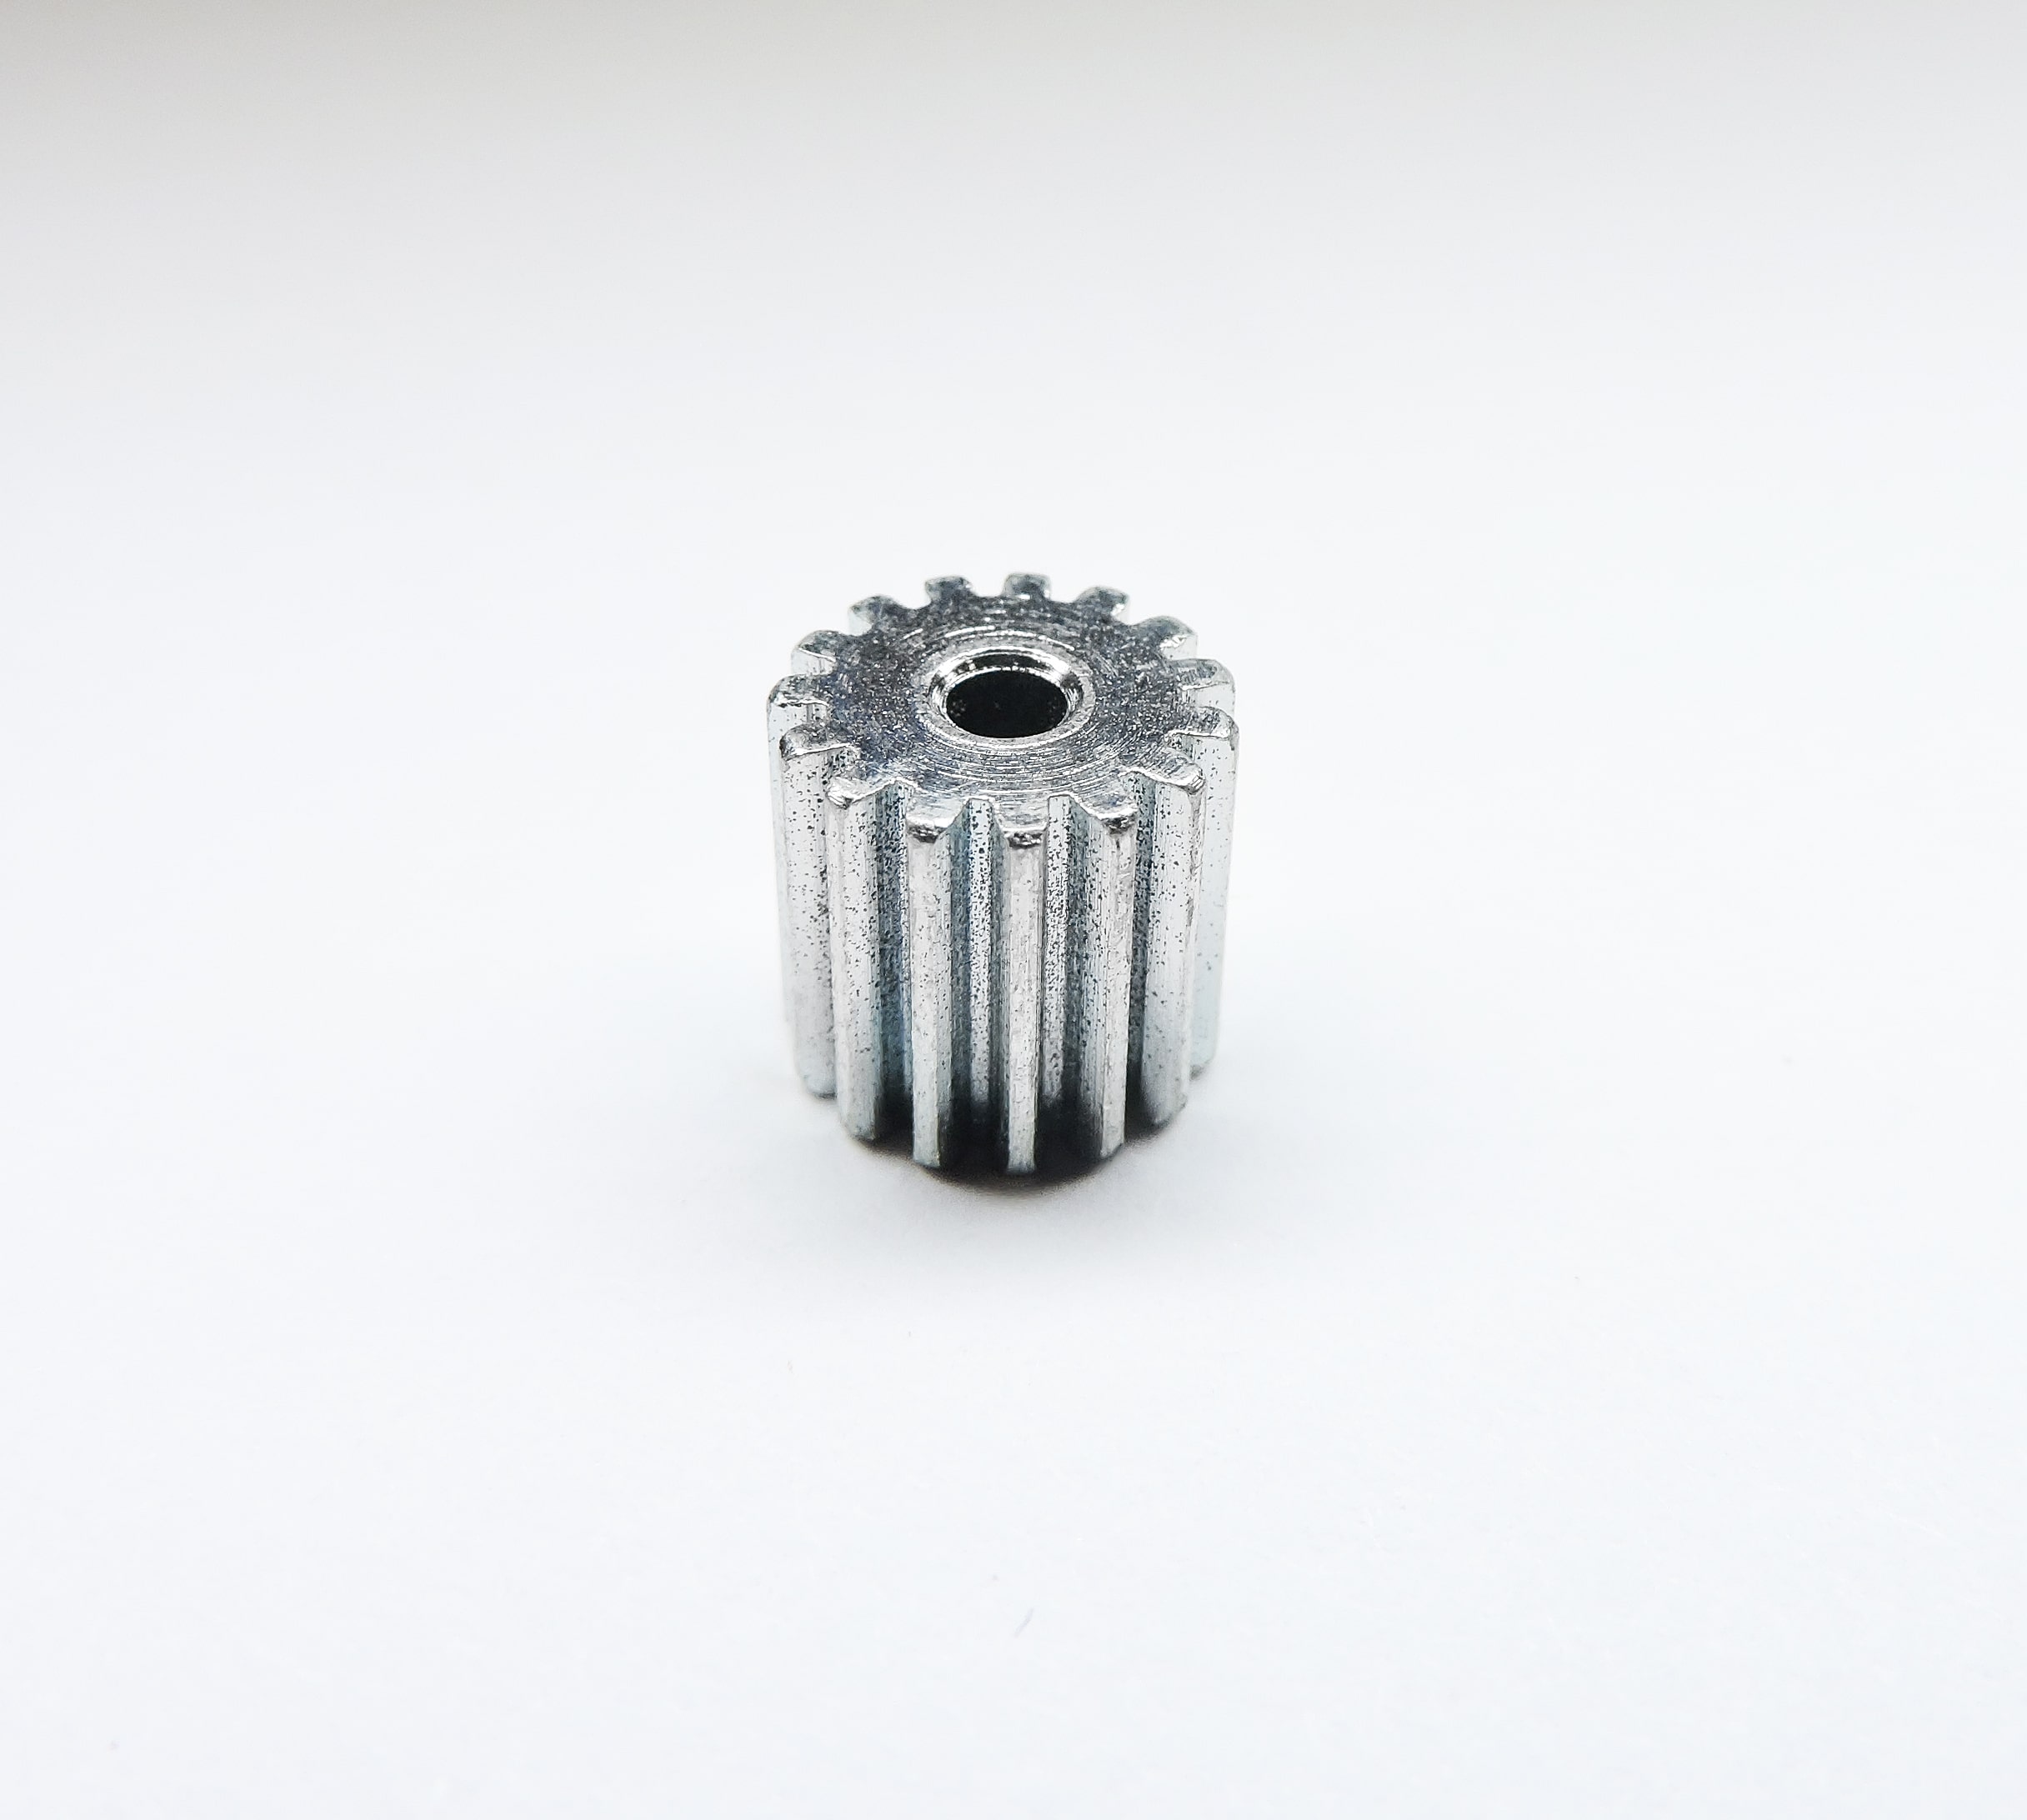 Precision CNC Machined Stainless Steel Gear